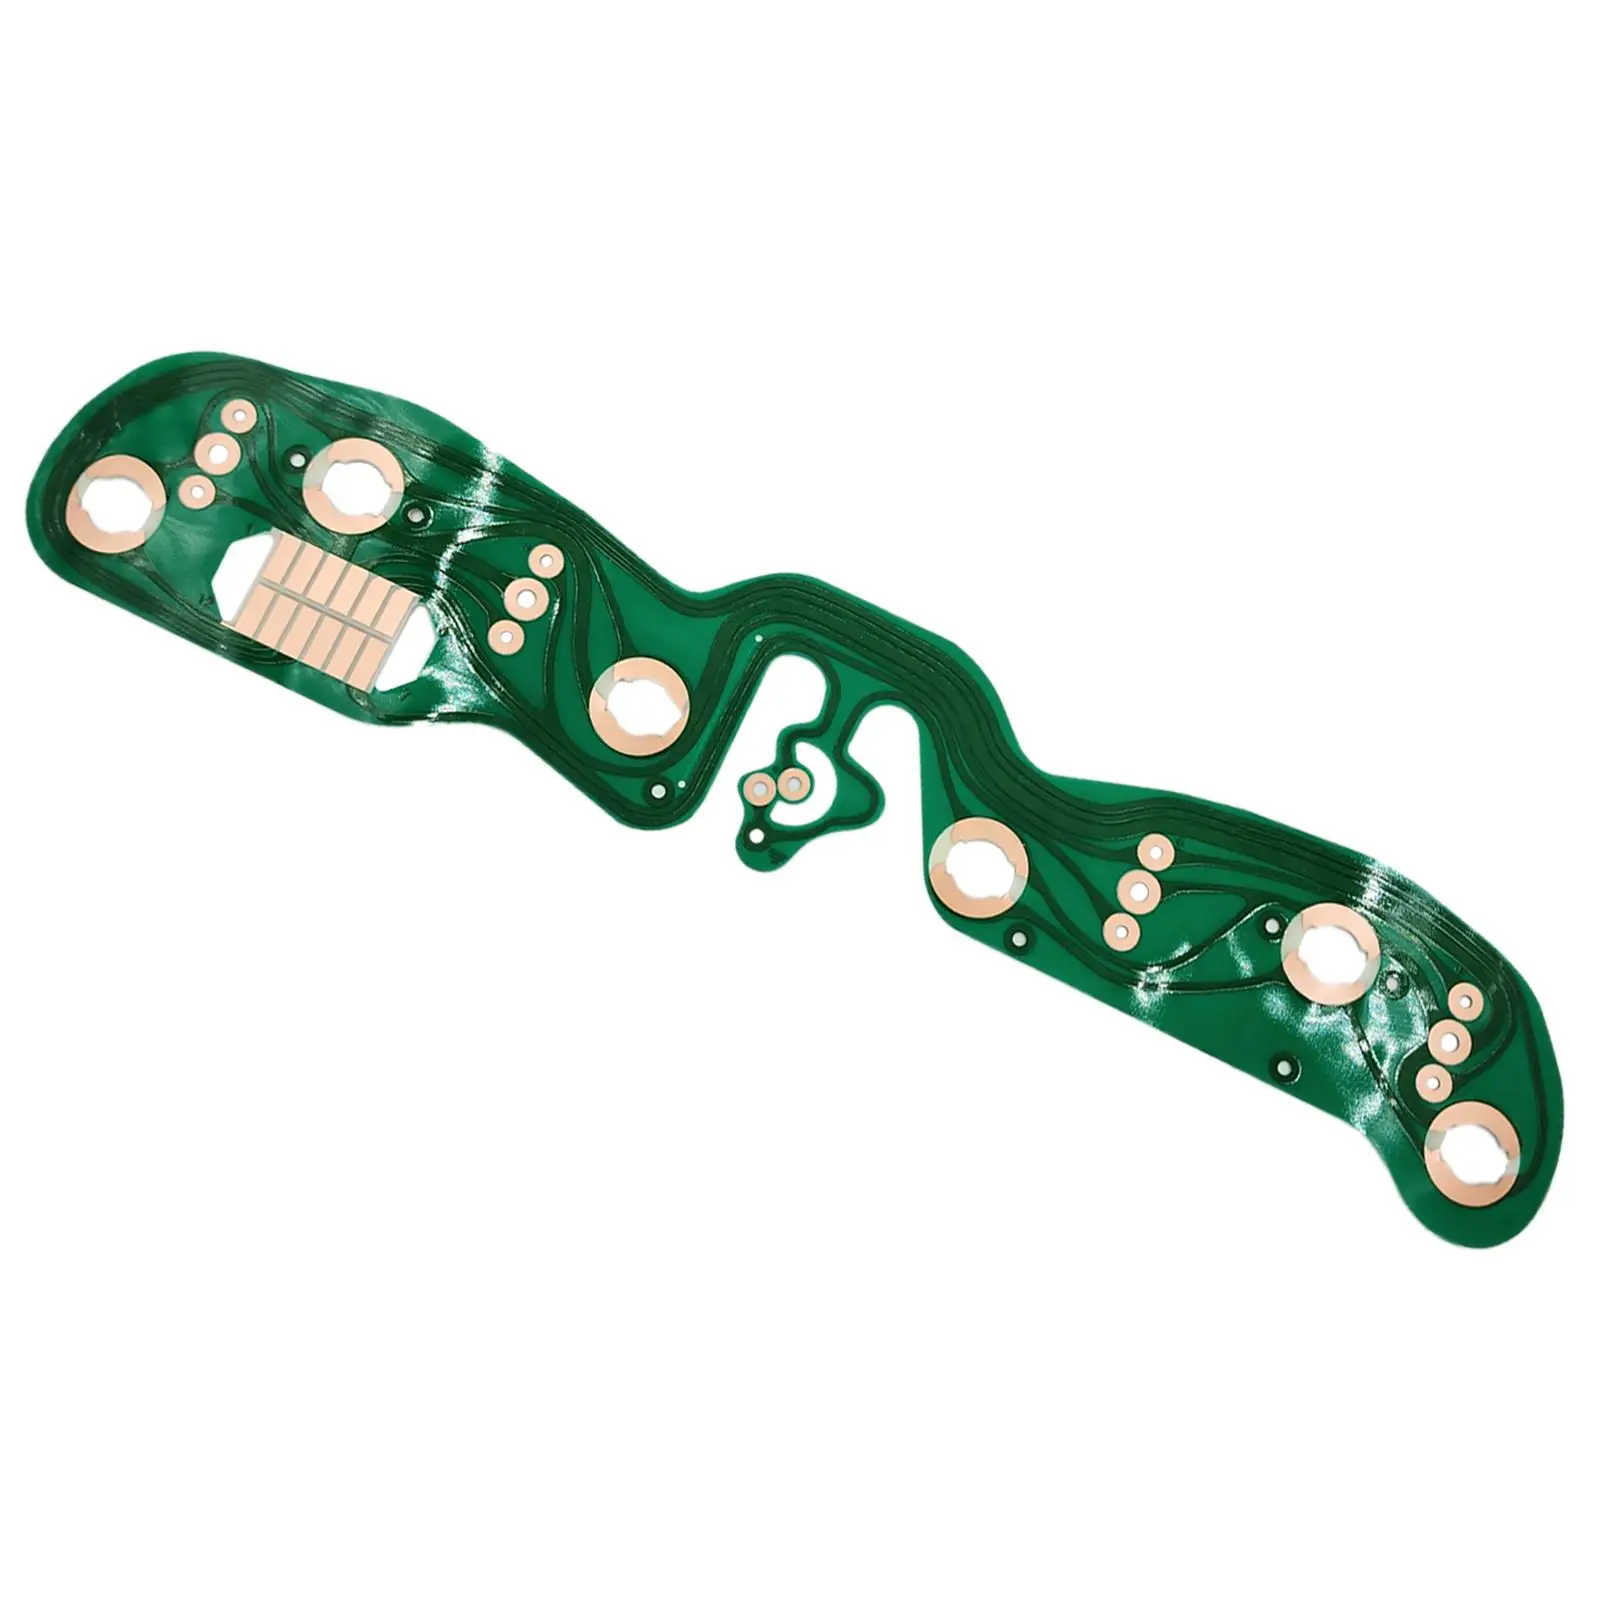 Gauges Printed Circuit Board, Panel Spare Parts Replaces Accessories Professional